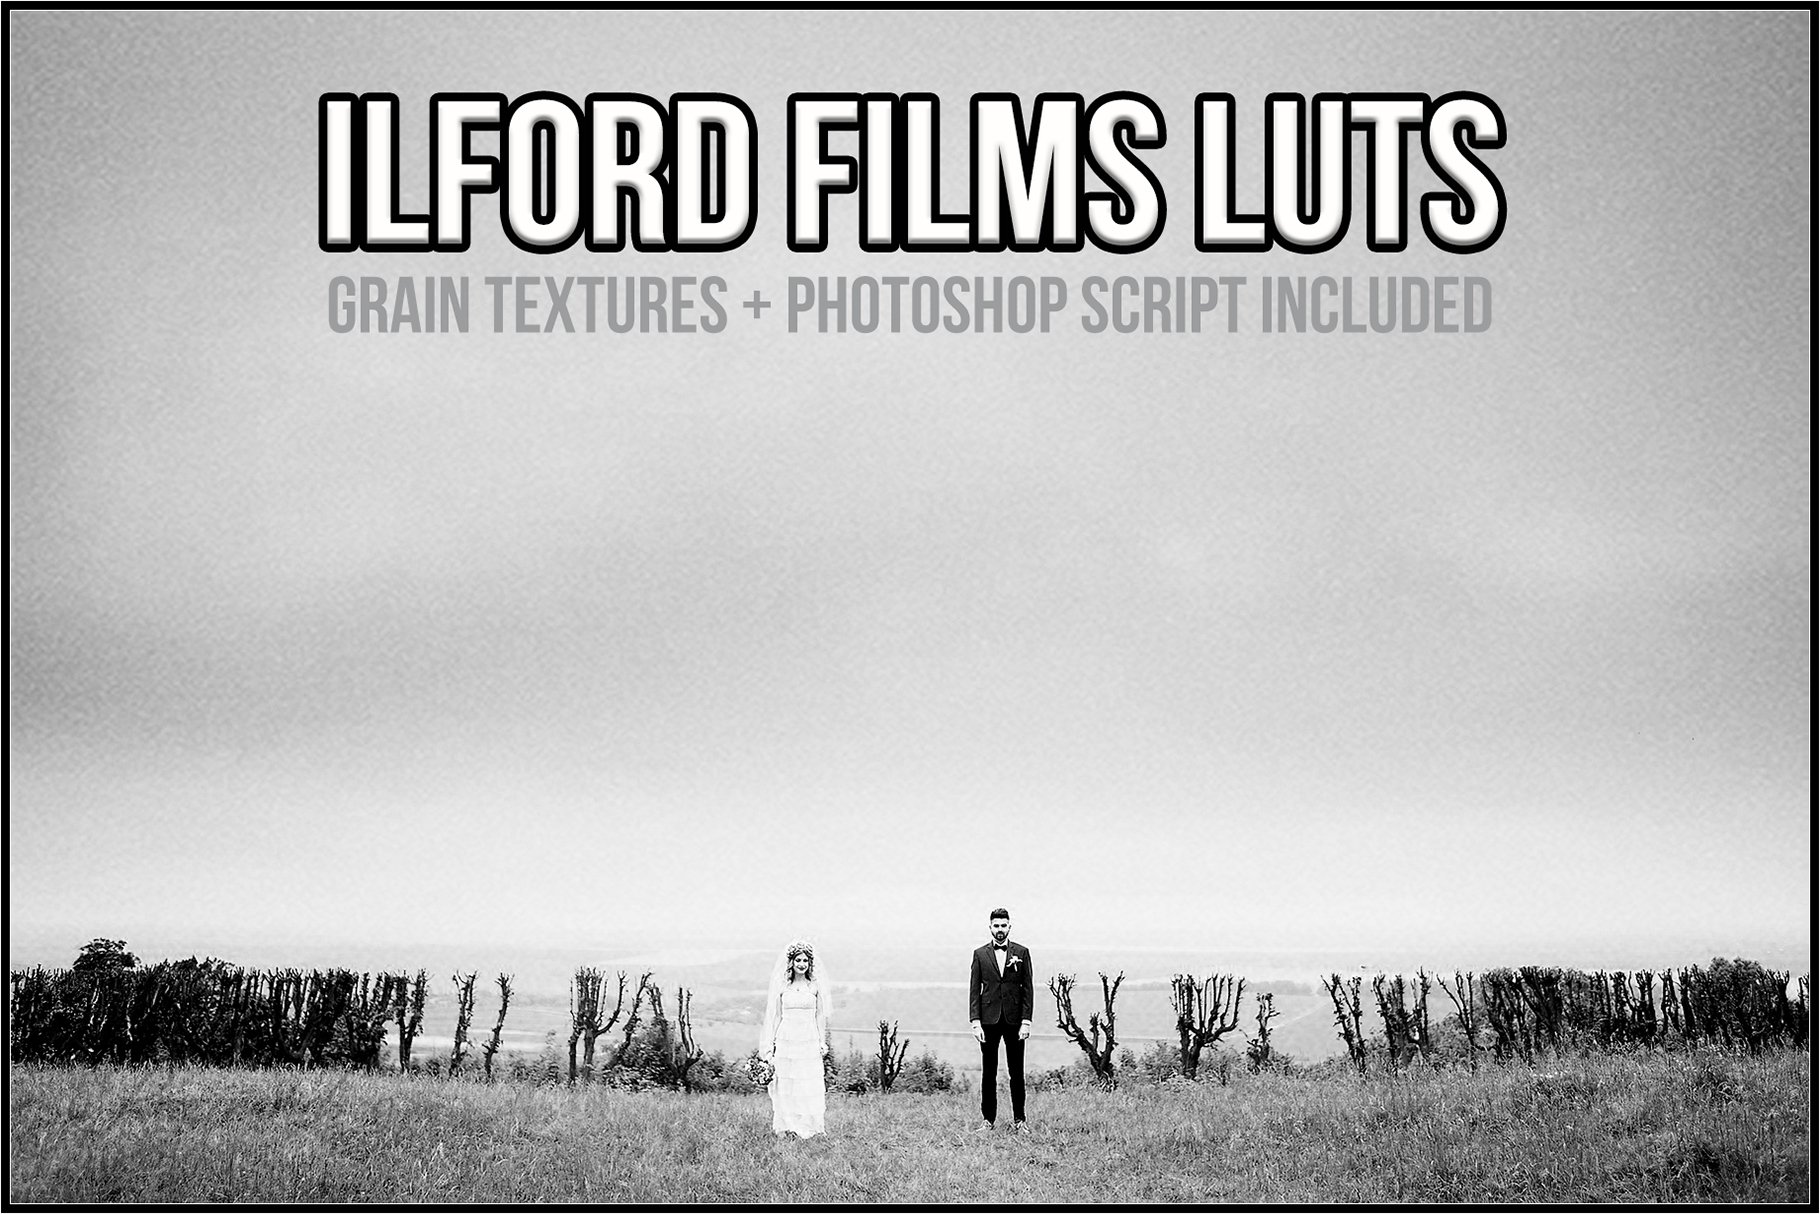 Ilford Films LUTscover image.